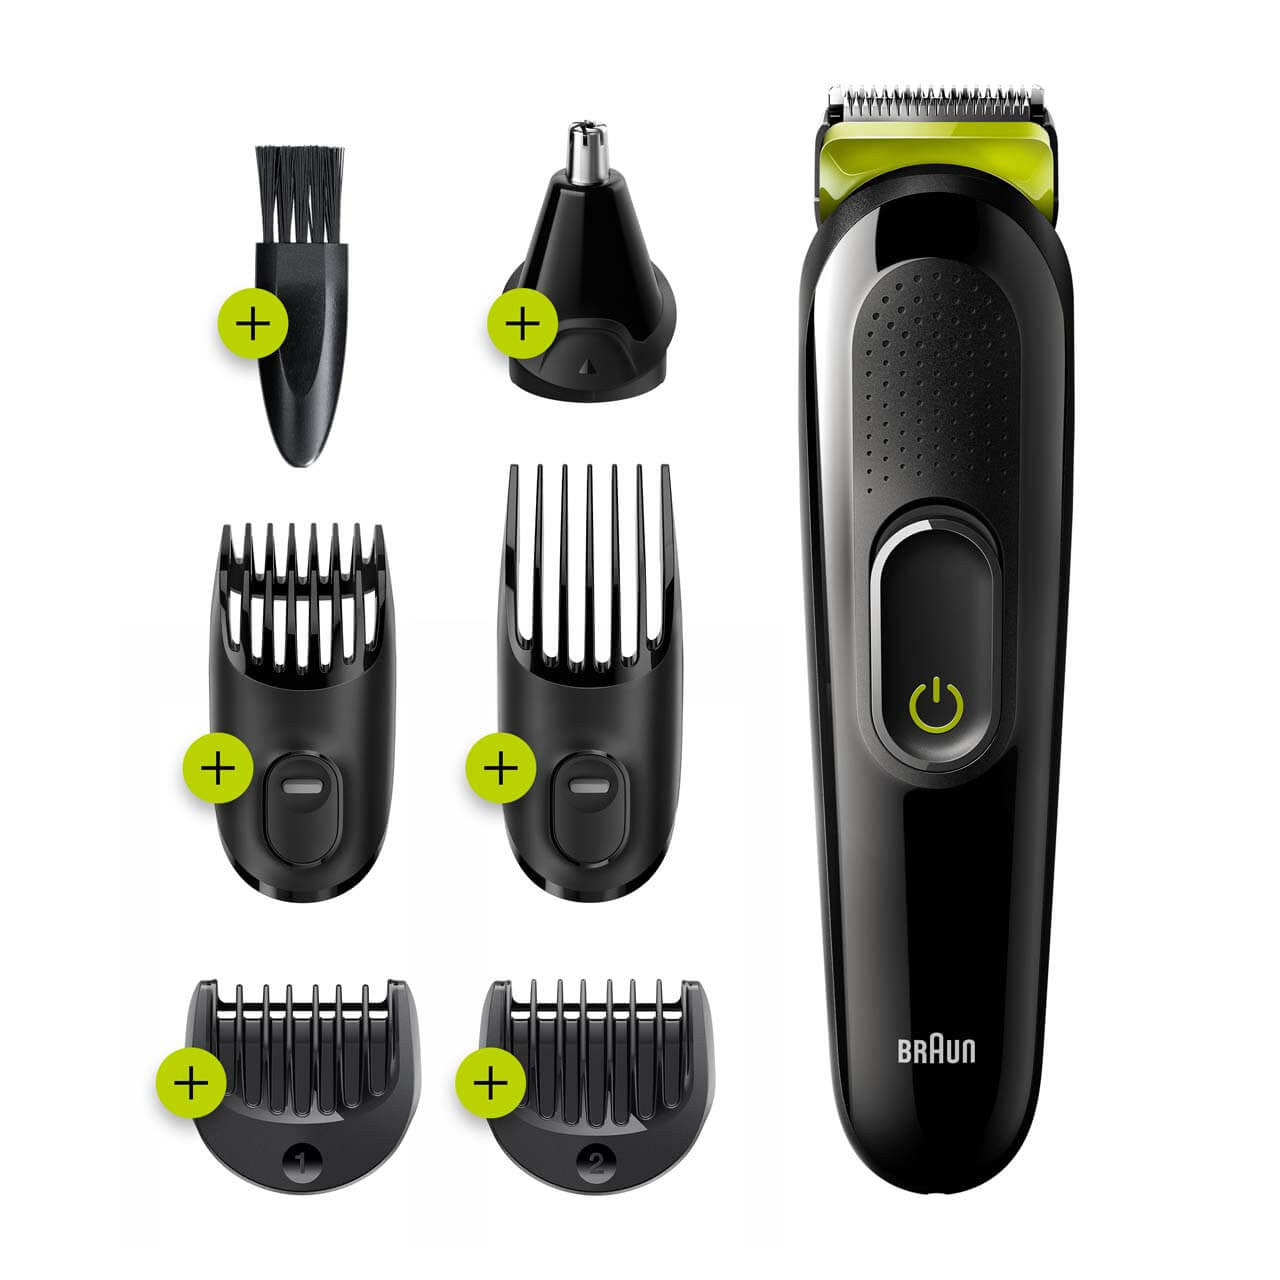 Braun All-in-one trimmer 3 for Face, Hair, and Body, 6-in-1